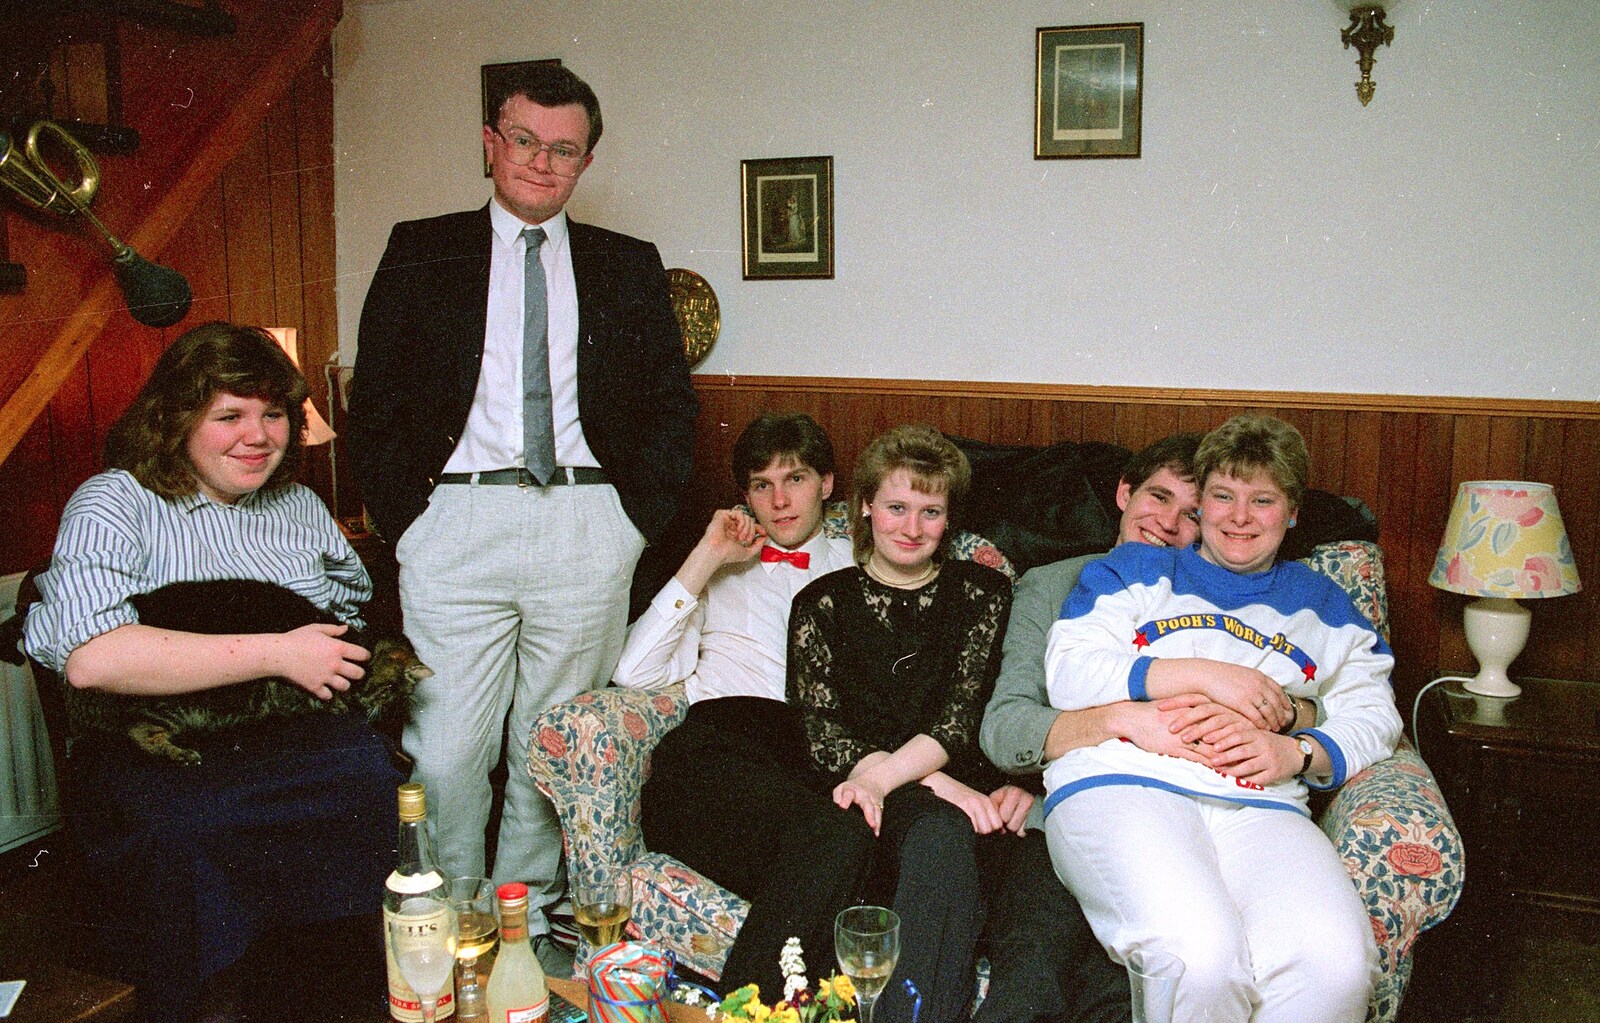 Sis, Hamish and the gang from Bransgore Barbeque and Soman-Wherry Drinks, Dorset and Norwich - 2nd April 1988